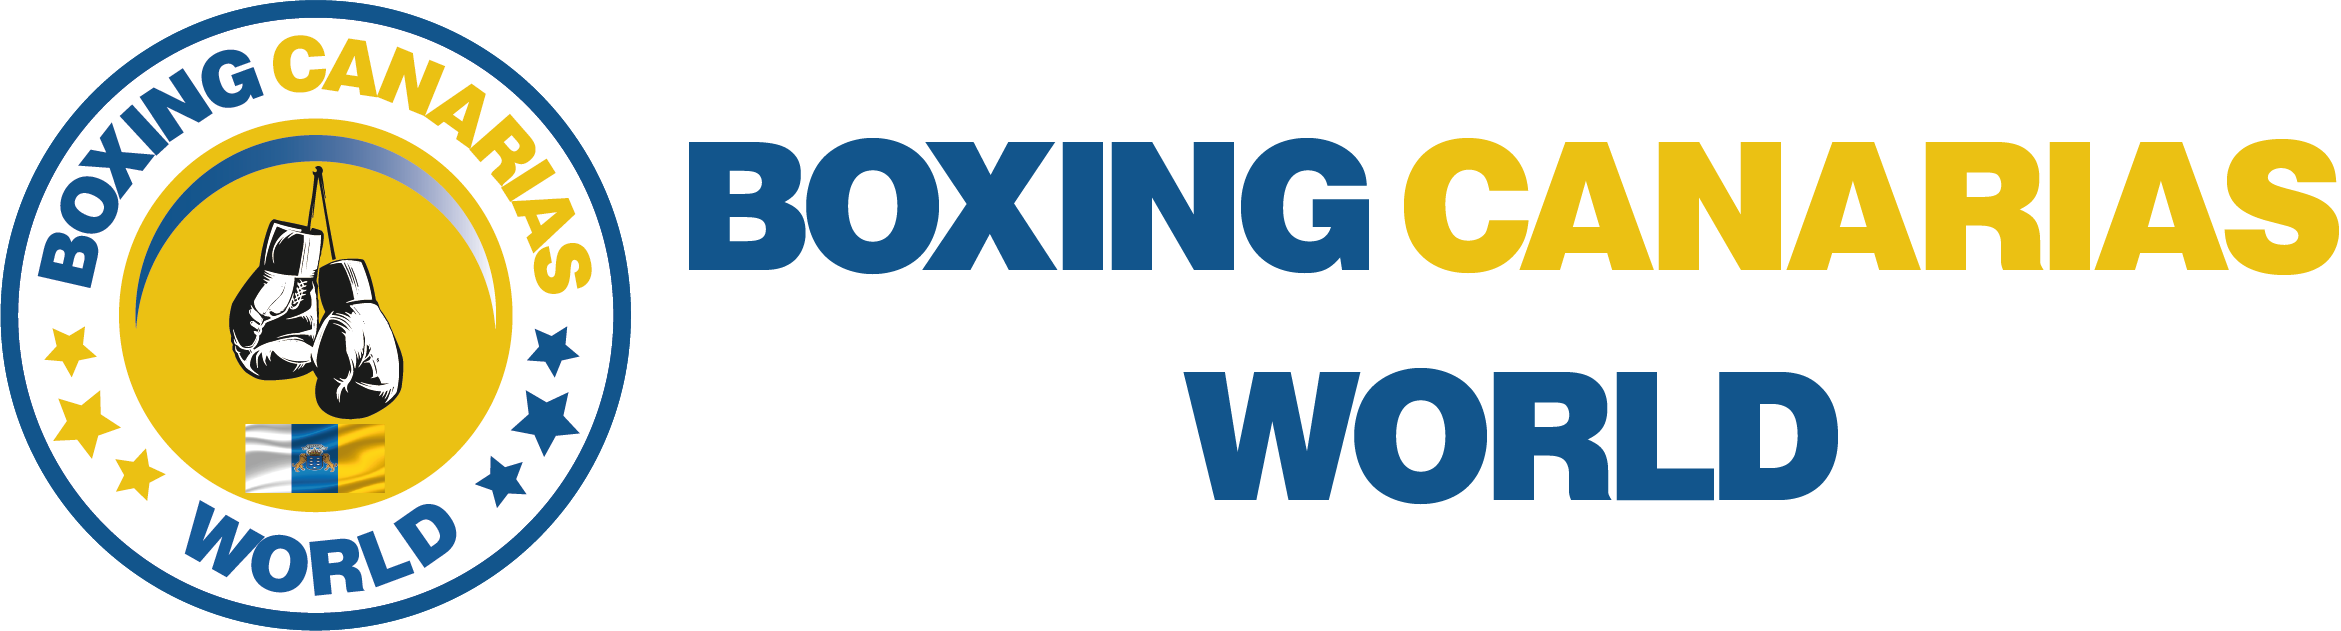 Boxing Canarias World